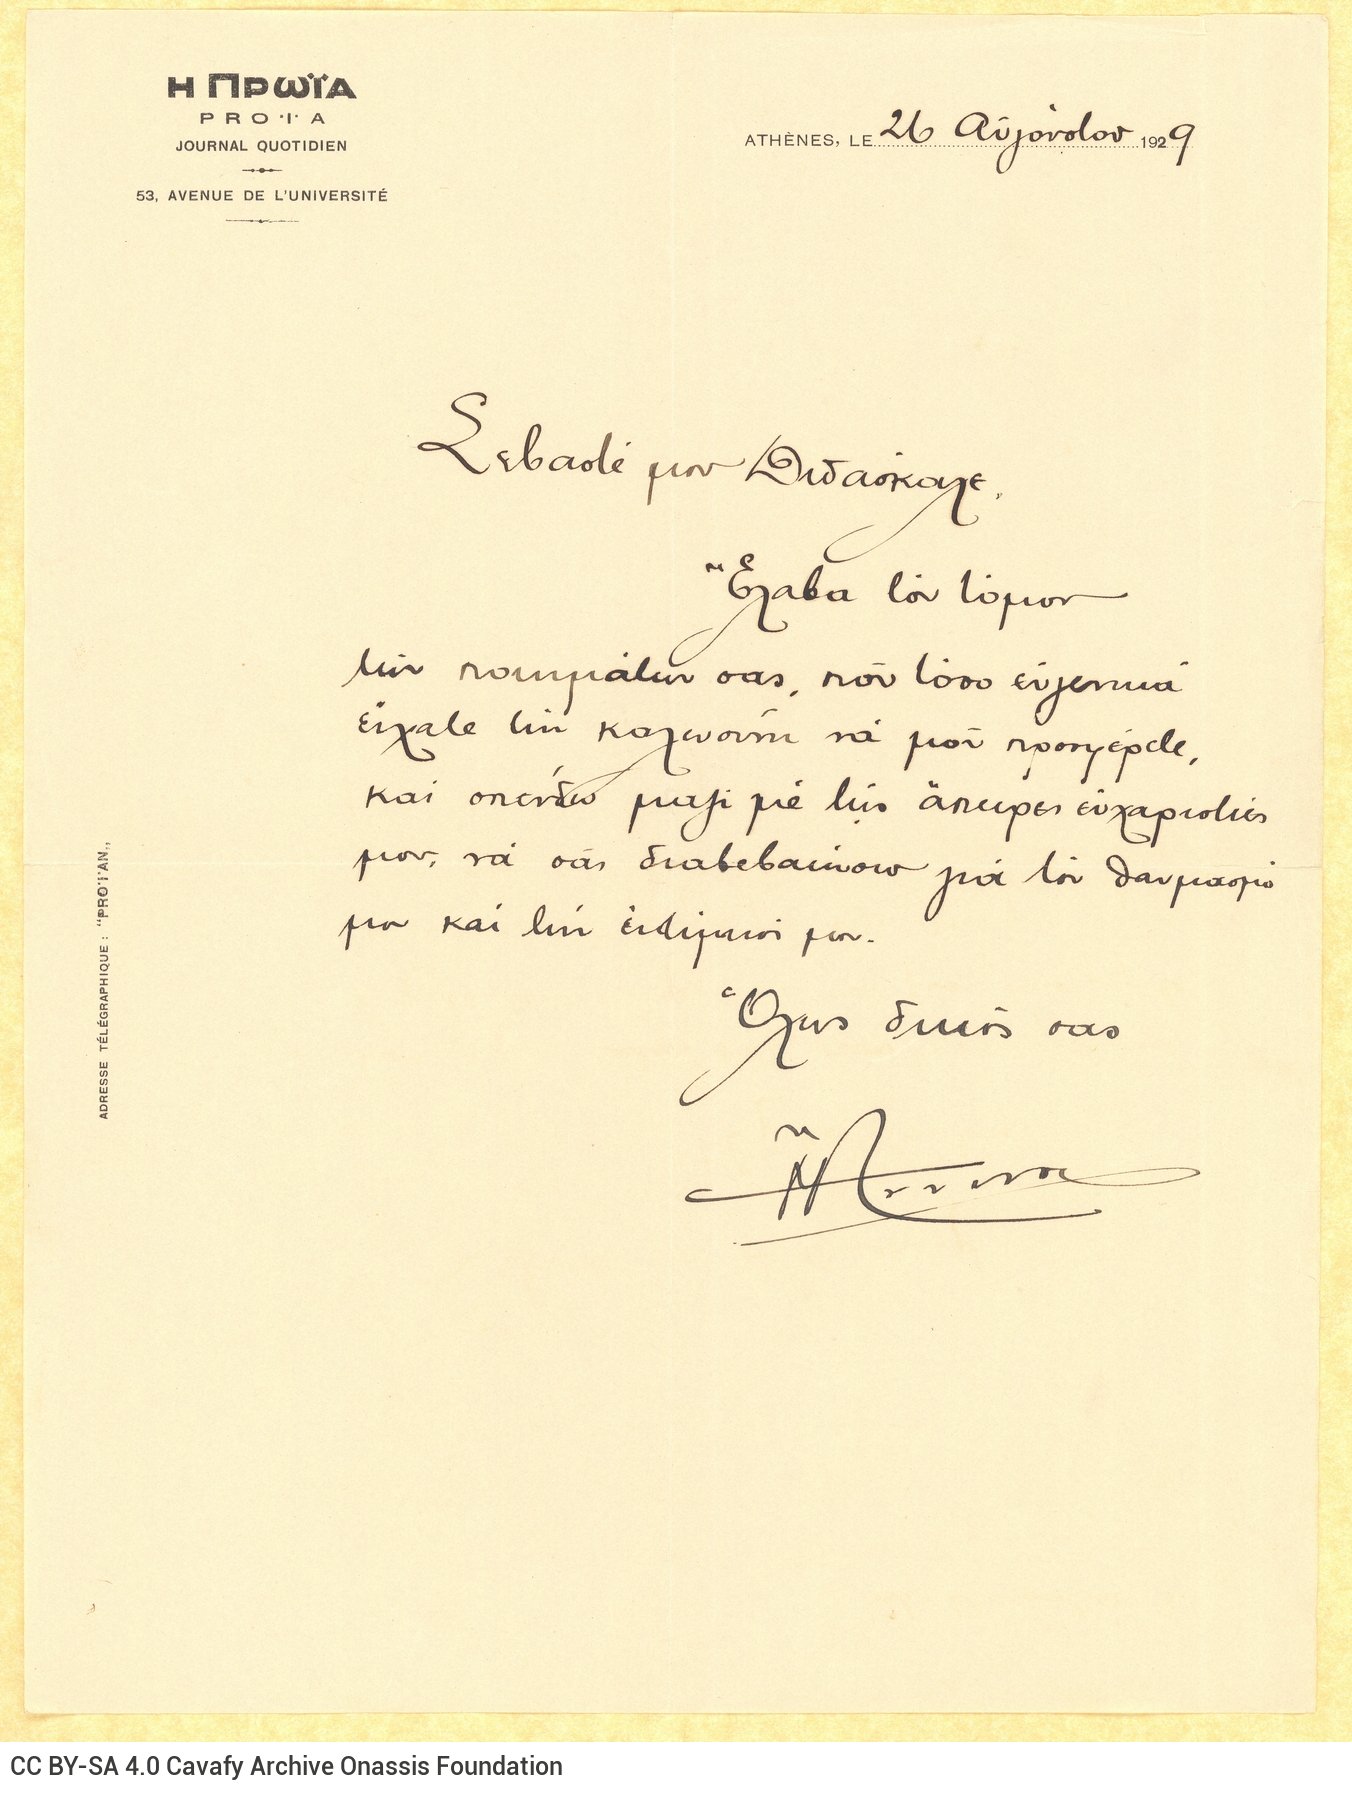 Handwritten letter by G. Anninos to Cavafy on one side of a letterhead of the newspaper *I Proia*, in which he thanks him for